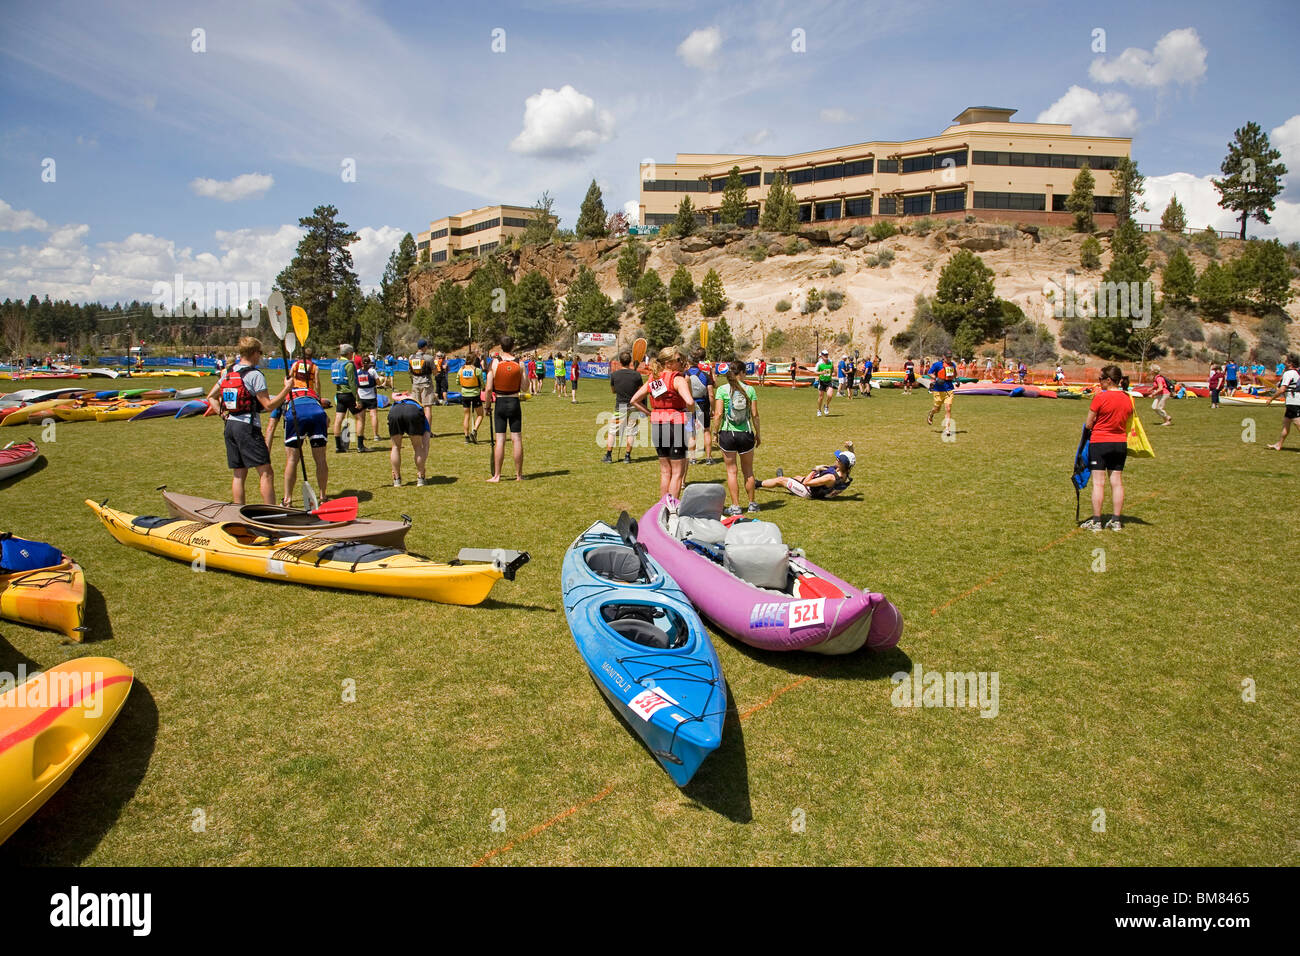 The PolePedalPaddle sporting event held each year in Bend, Oregon